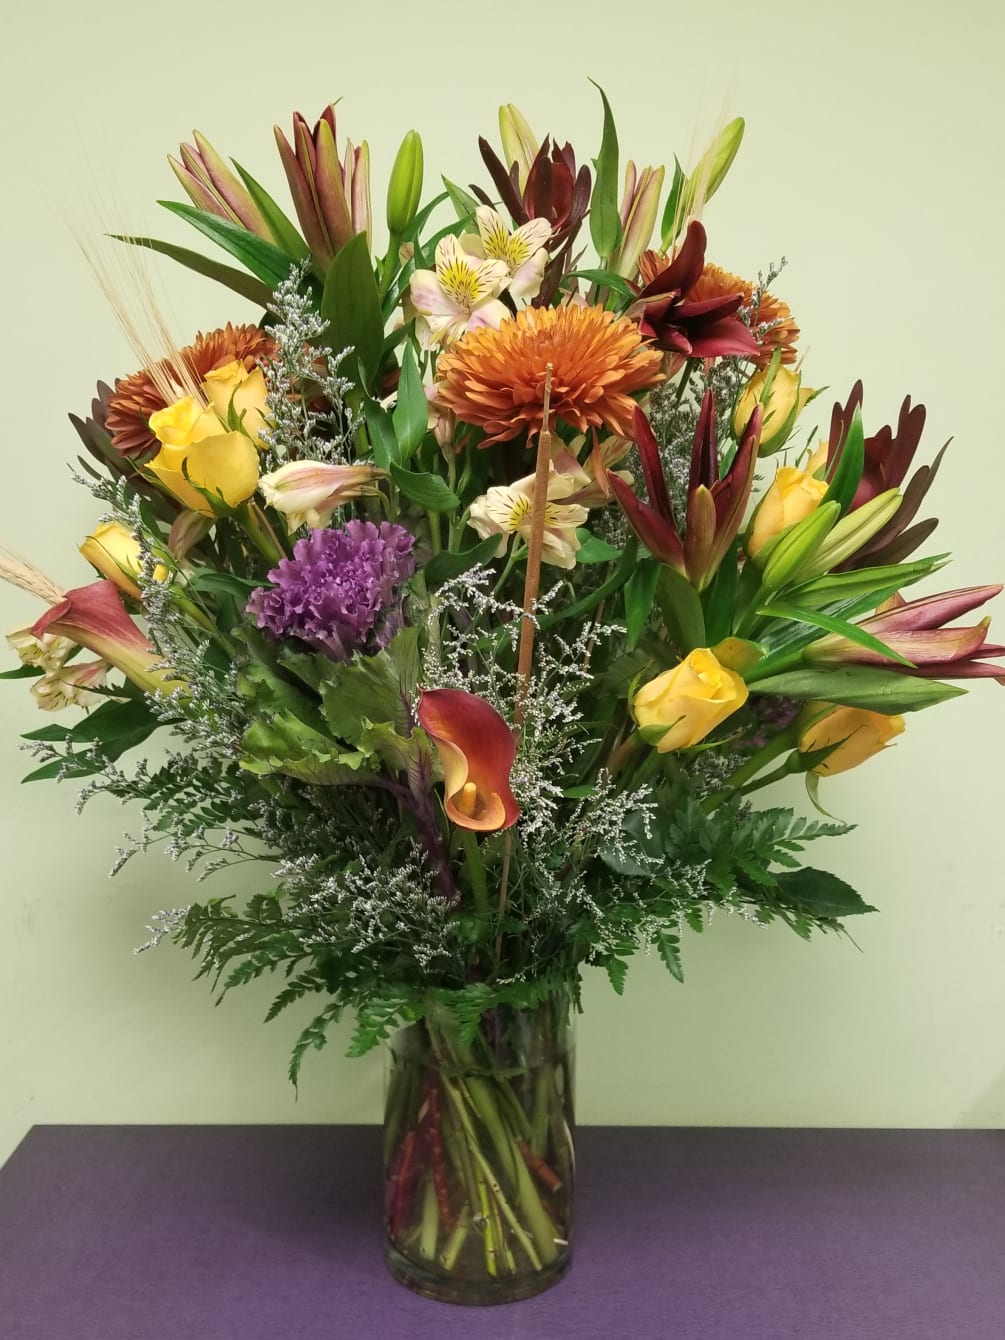 This exotic arrangement is truly one of a kind. It is bold